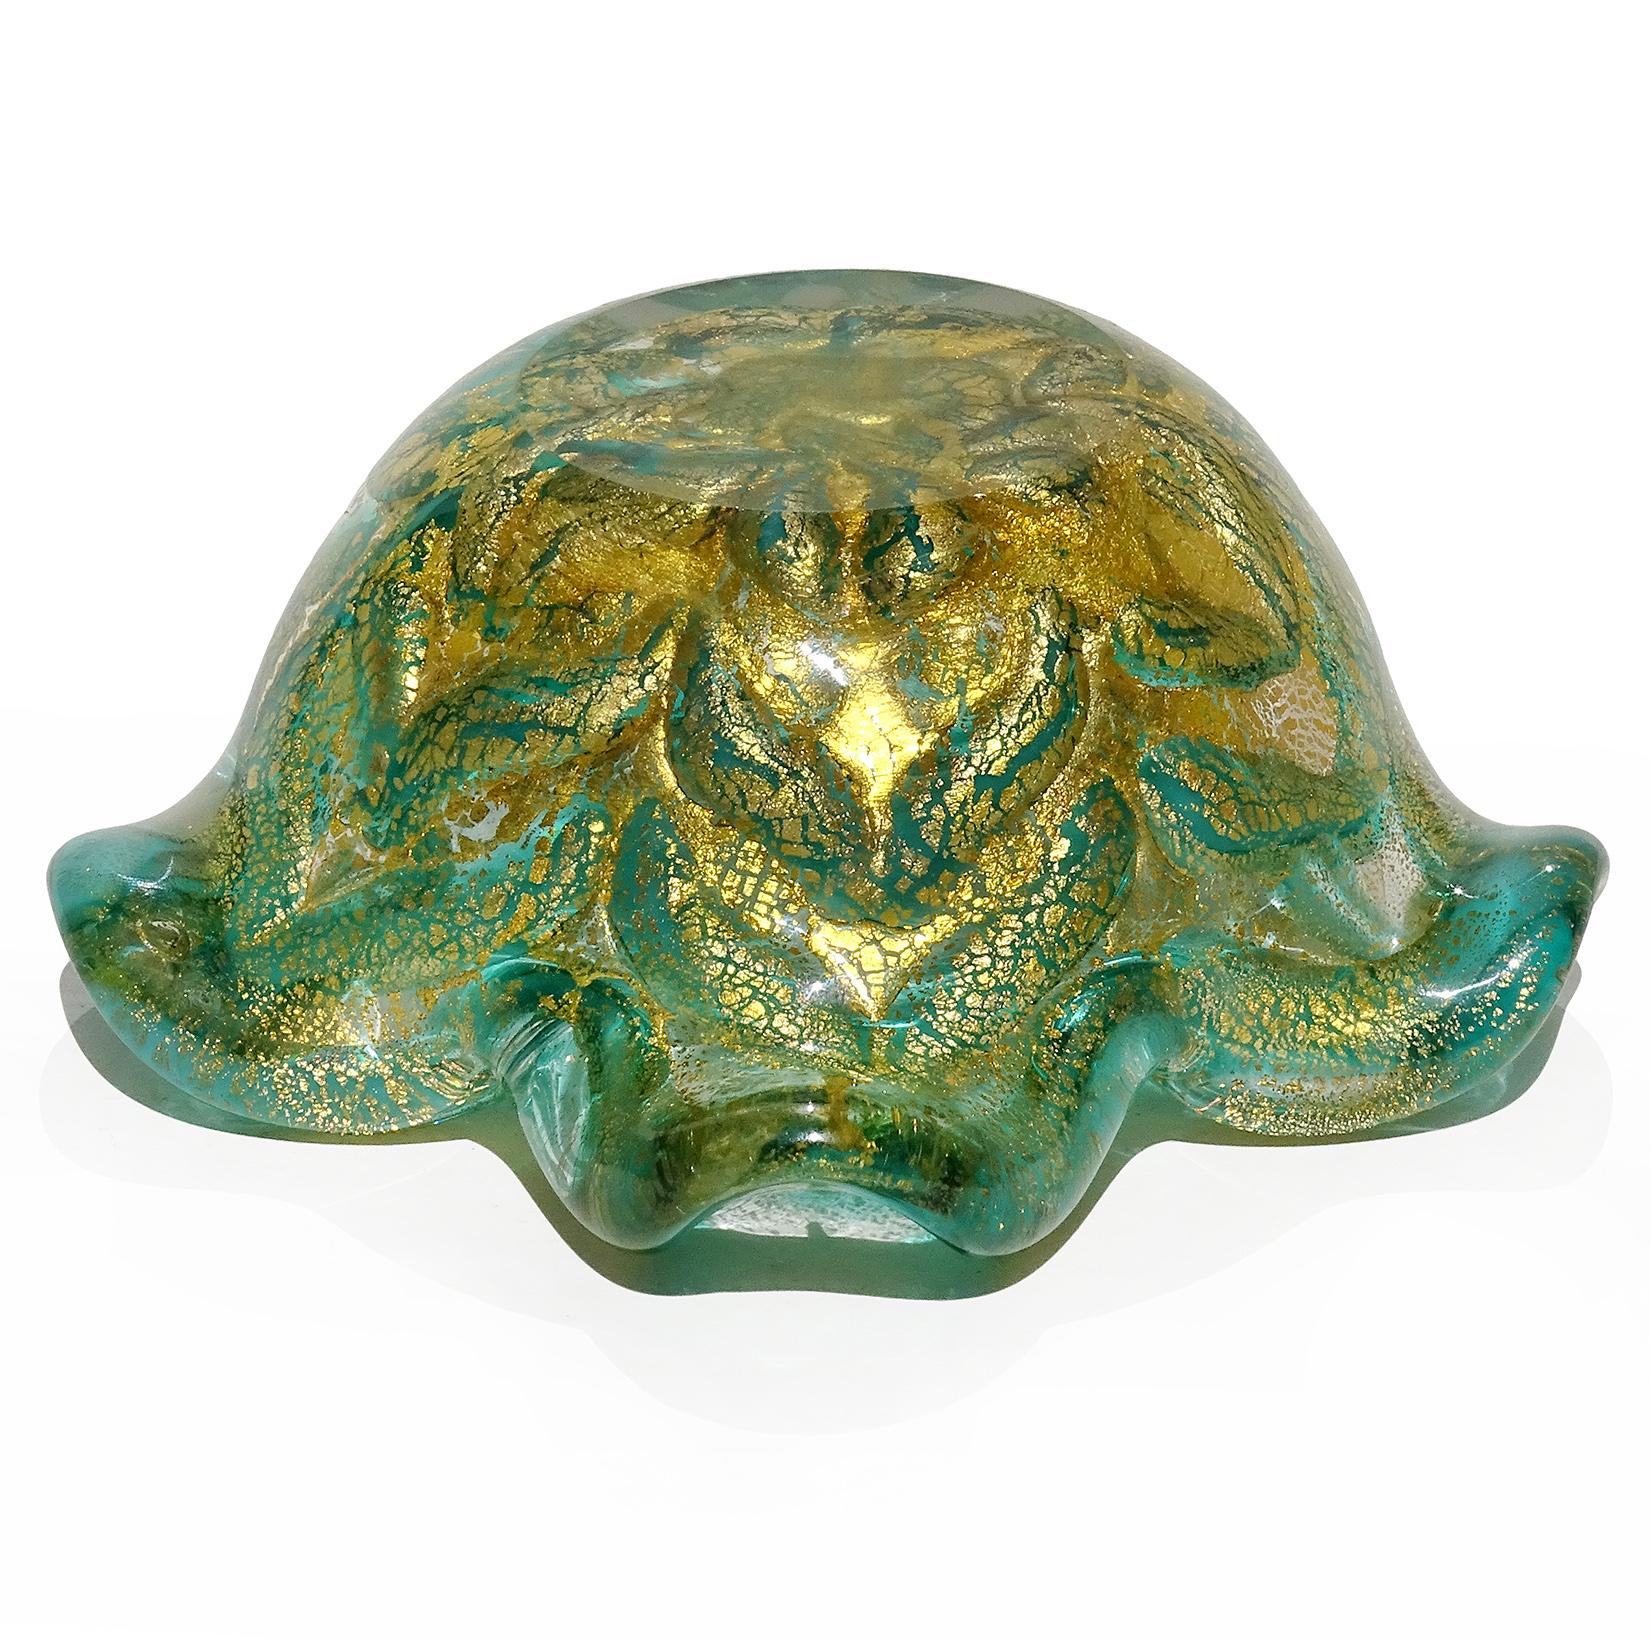 Barovier Toso Murano Green Gold Flecks Italian Art Glass Decorative Flower Bowl In Good Condition For Sale In Kissimmee, FL